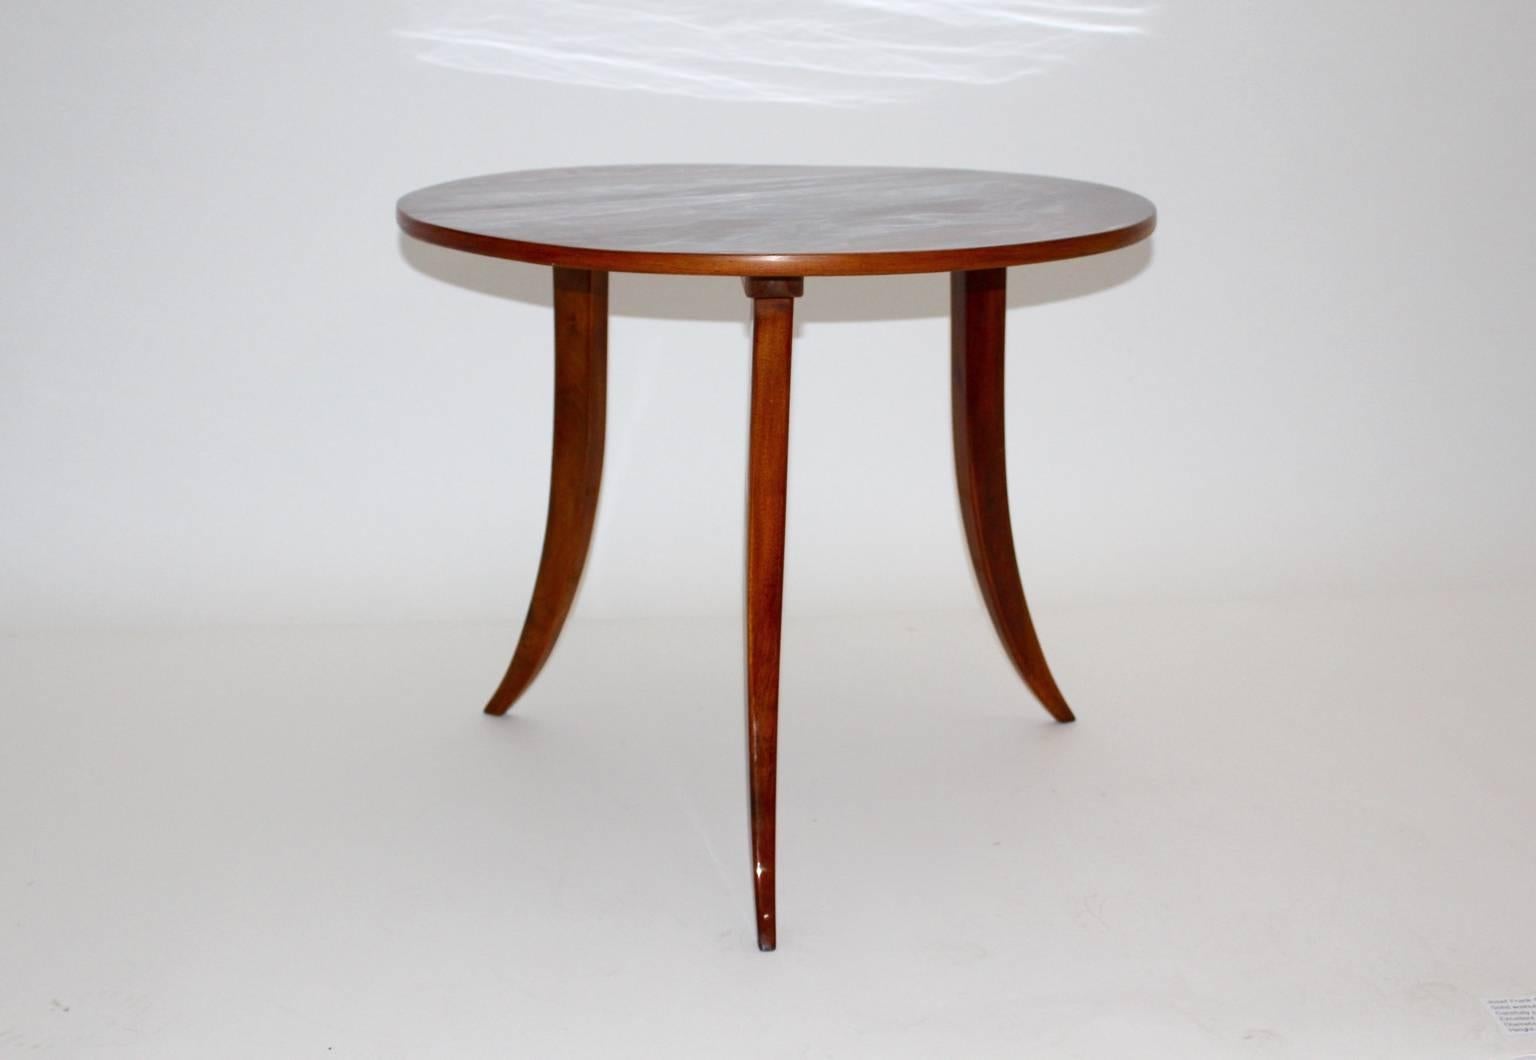 Art Deco coffee table or side table shows solid walnut feet with a walnut veneered table top with a wonderful wood grain
Josef Frank stands for effortless and timeless design.
Josef Frank famed philosophy which asks to mix your beloved furniture